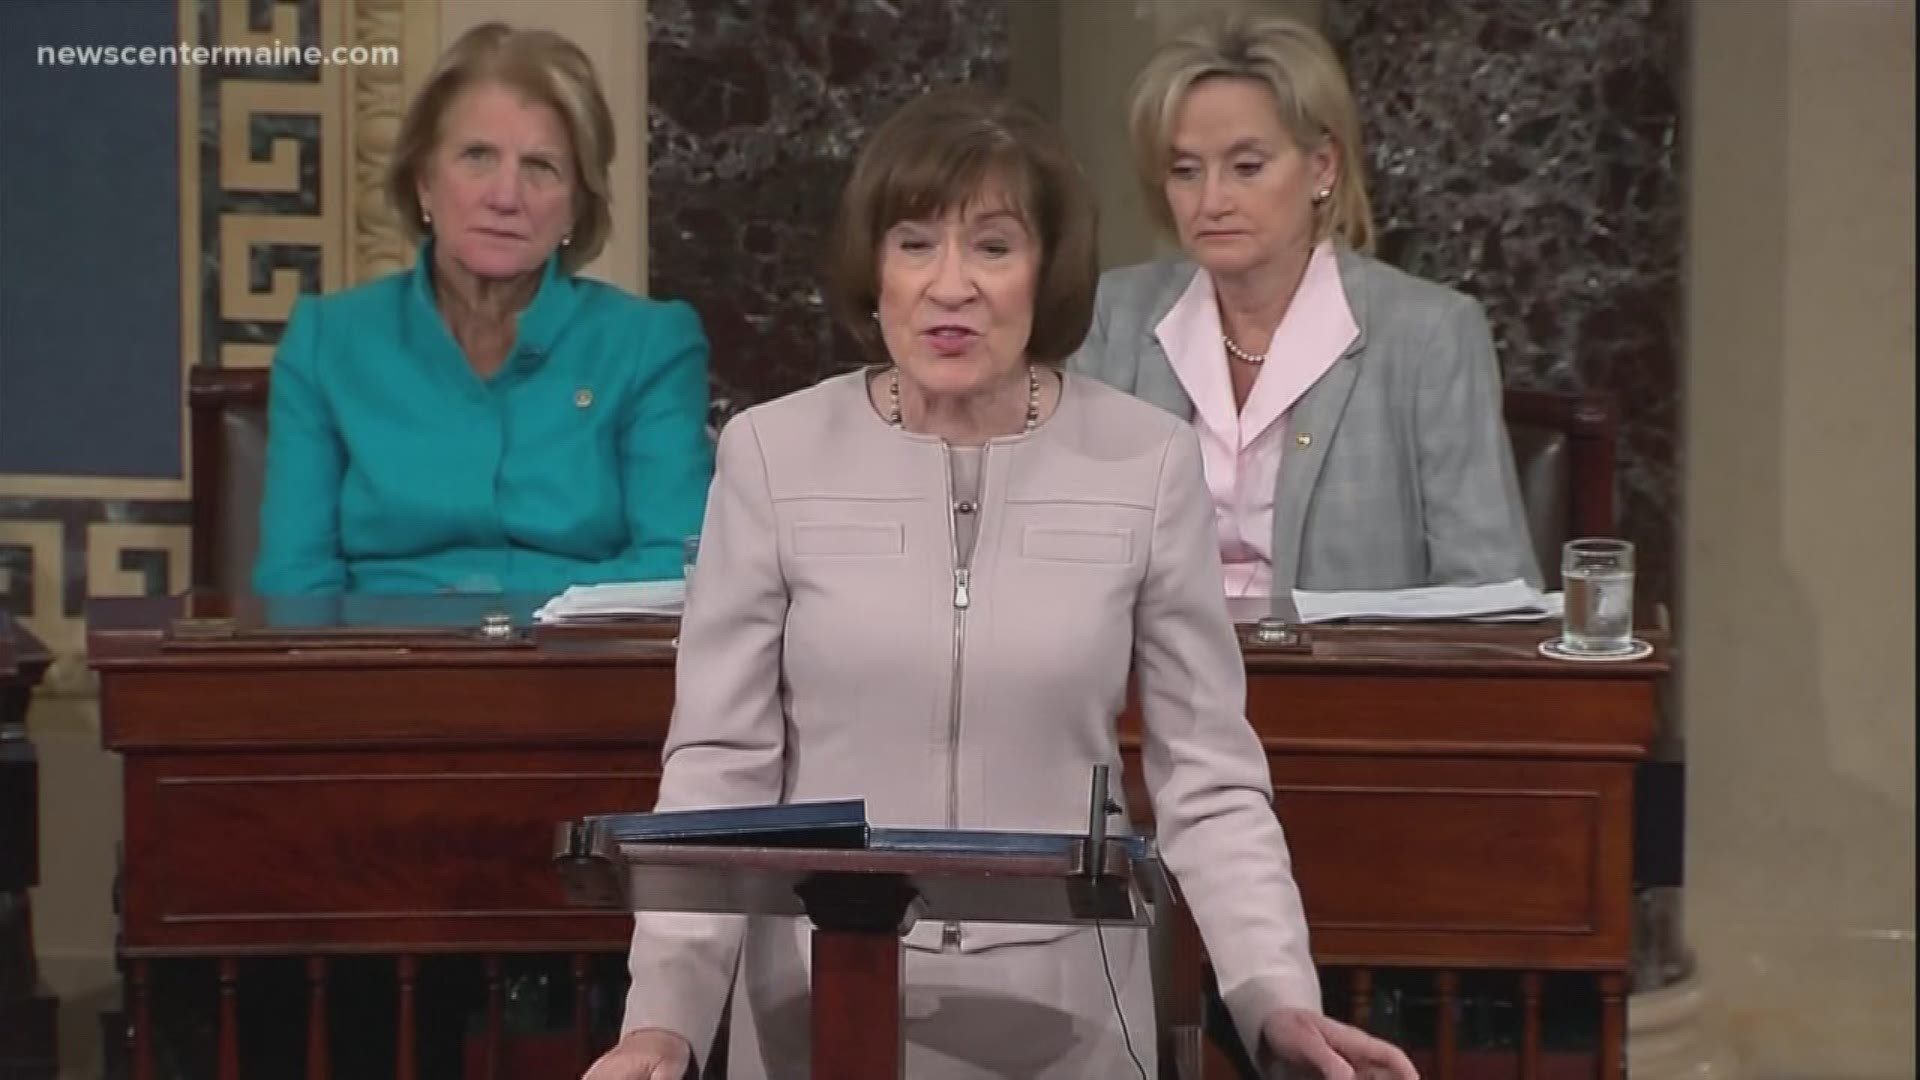 Campaign to Rescind Sen. Collins' Honorary Degree